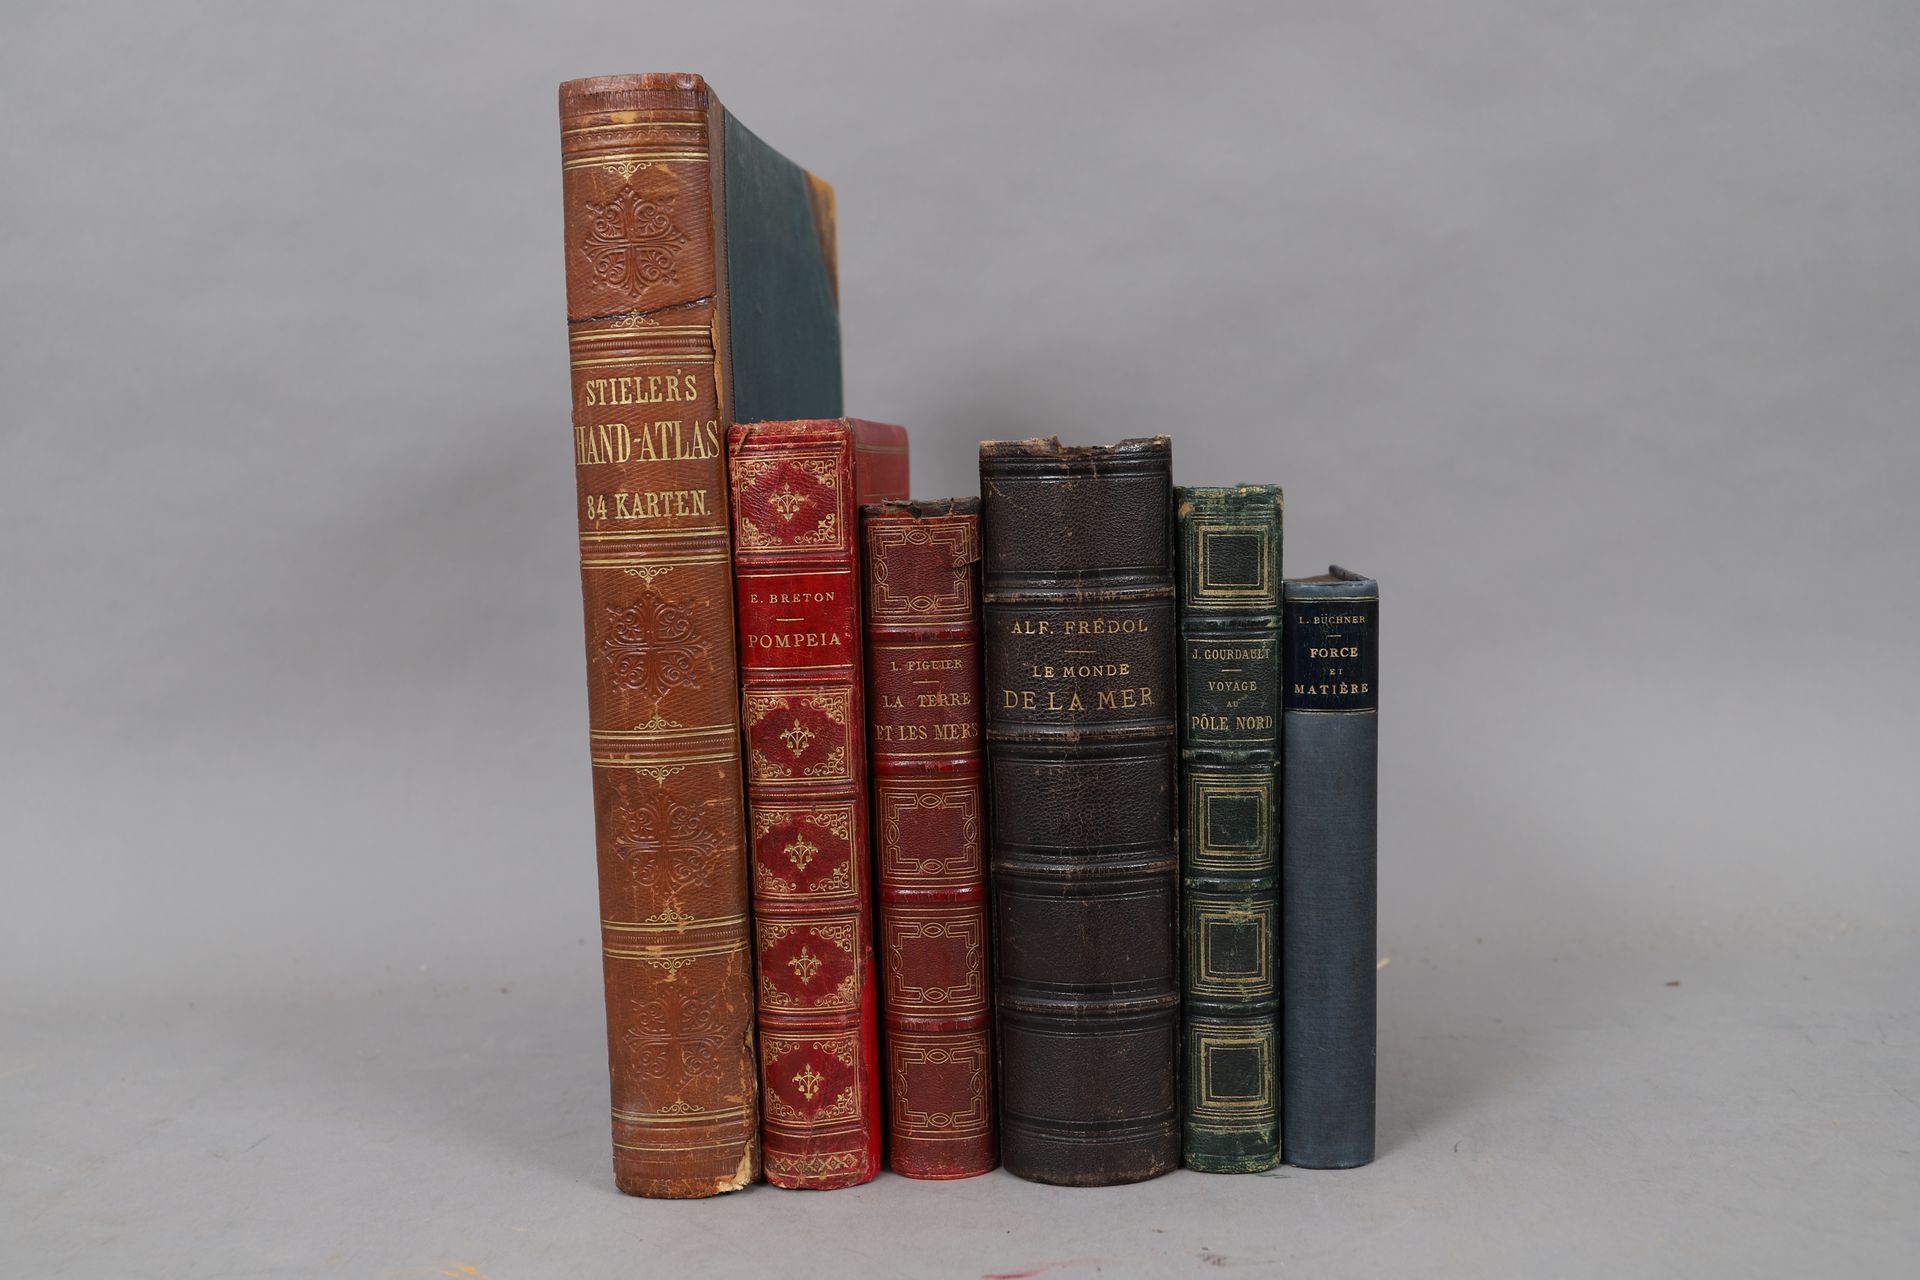 Null TRAVEL and GEOGRAPHY

LOT of 6 bound volumes

19th and 20th century